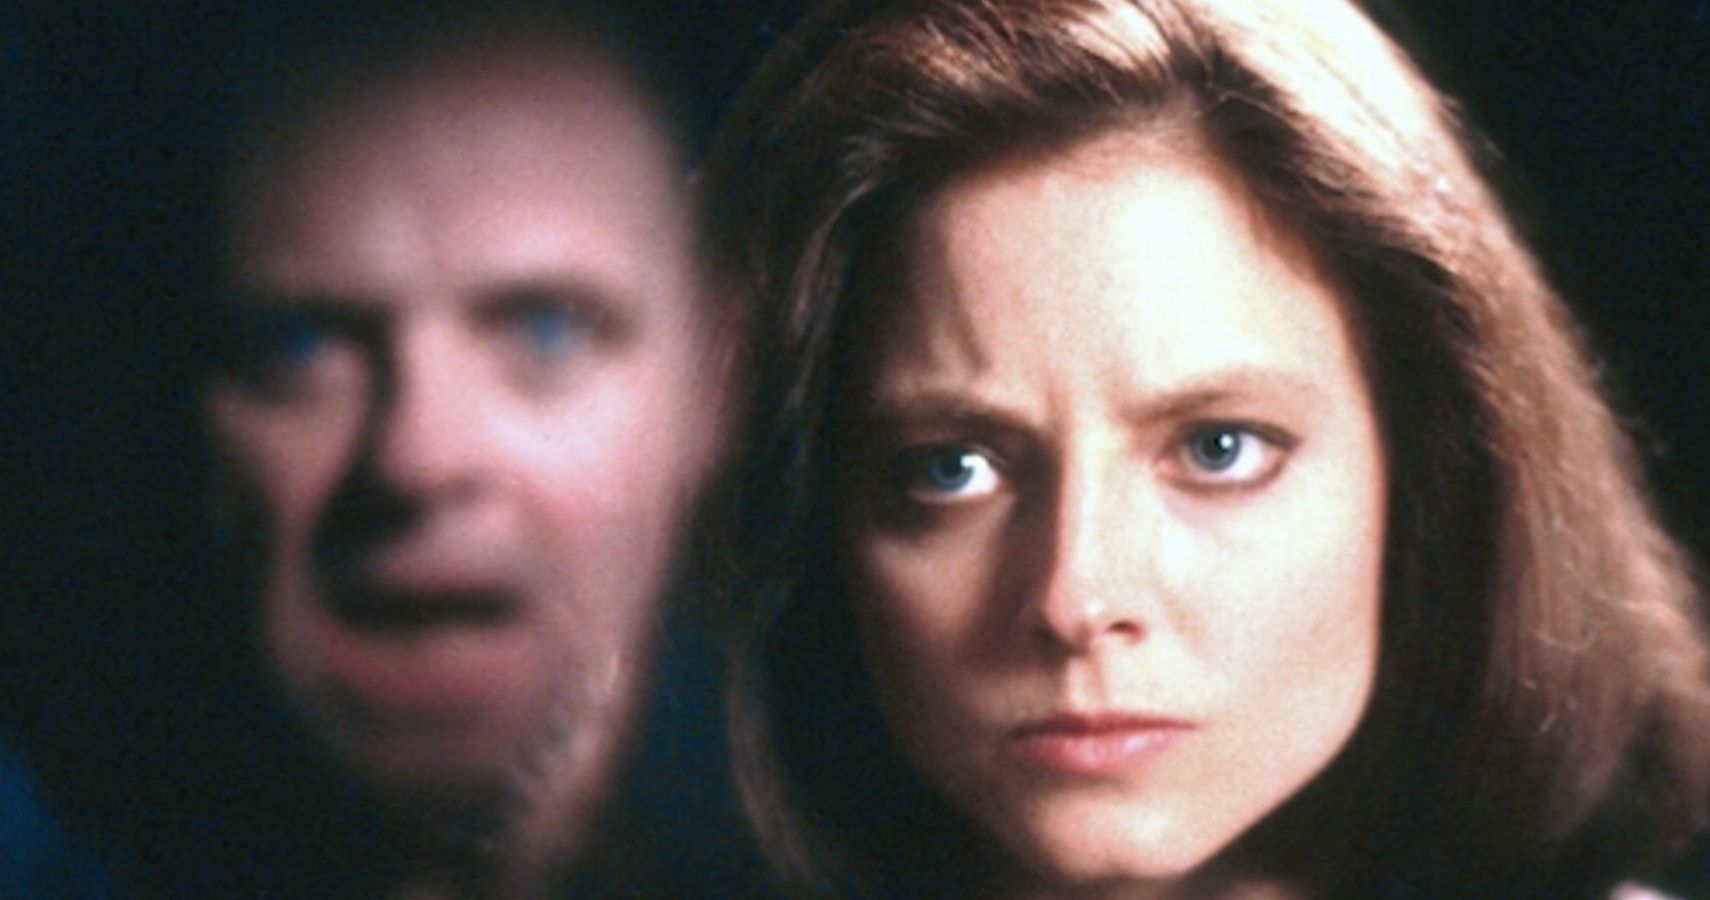 10 Weird Things Cut From The Silence Of The Lambs Movie (That Were In The Book)